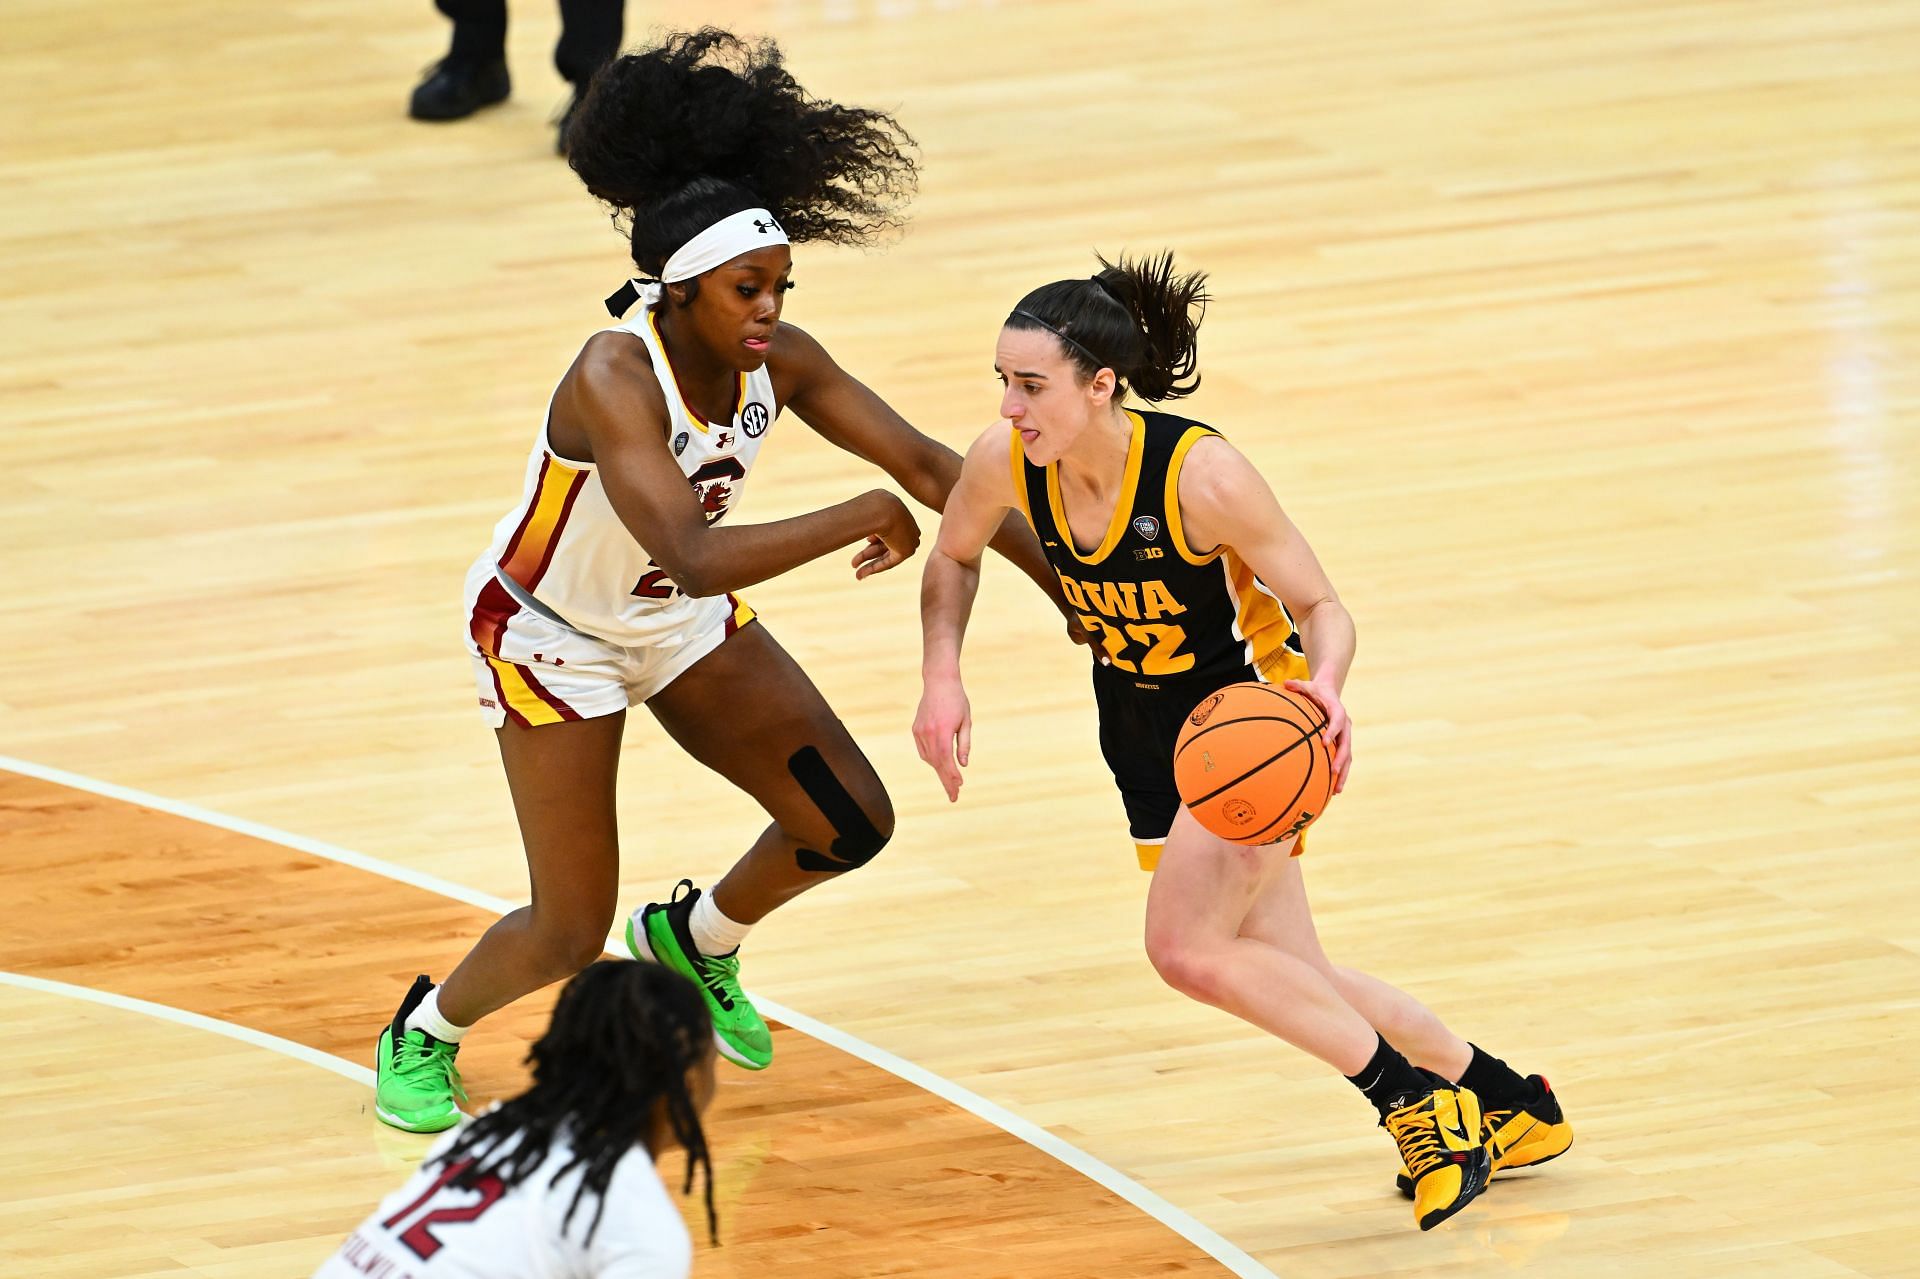 Caitlin Clark is expected to be chosen as No. 1 pick in the WNBA Draft by the Indiana Fever on Monday.